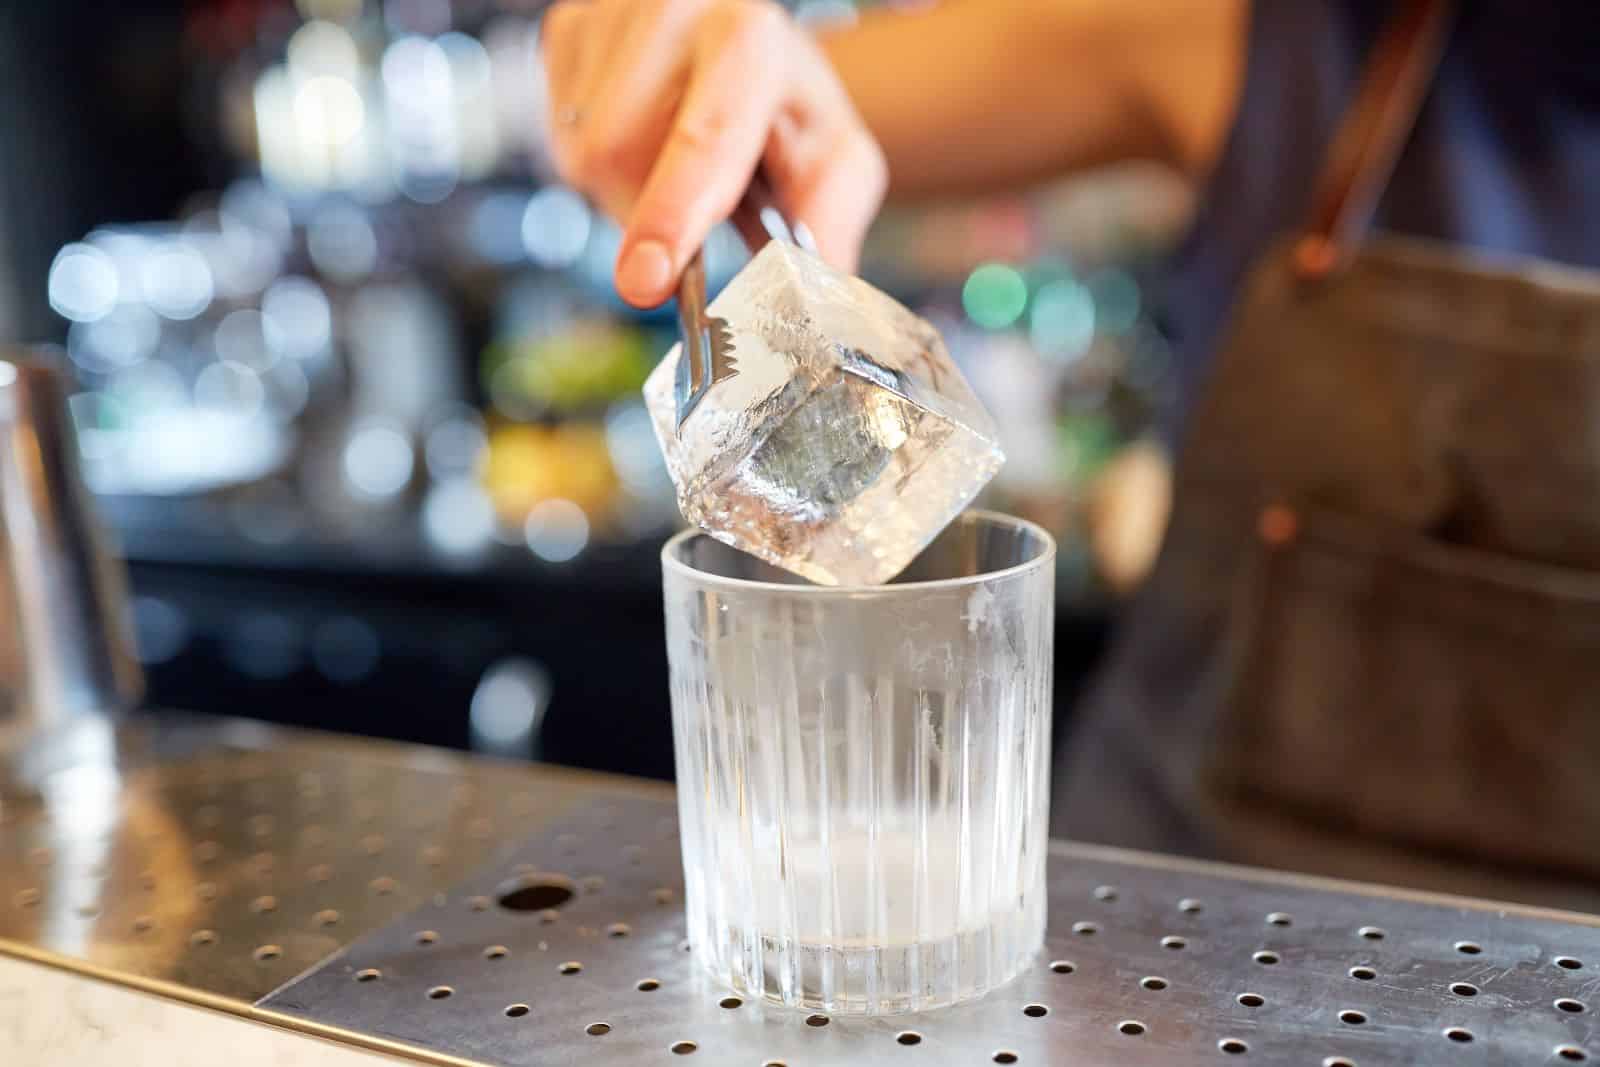 Image Credit: Shutterstock / Ground Picture <p>Selling at $8 per cube, these luxury ice options promise a chill without diluting your drink. Newsflash: your freezer’s ice does that too.</p>